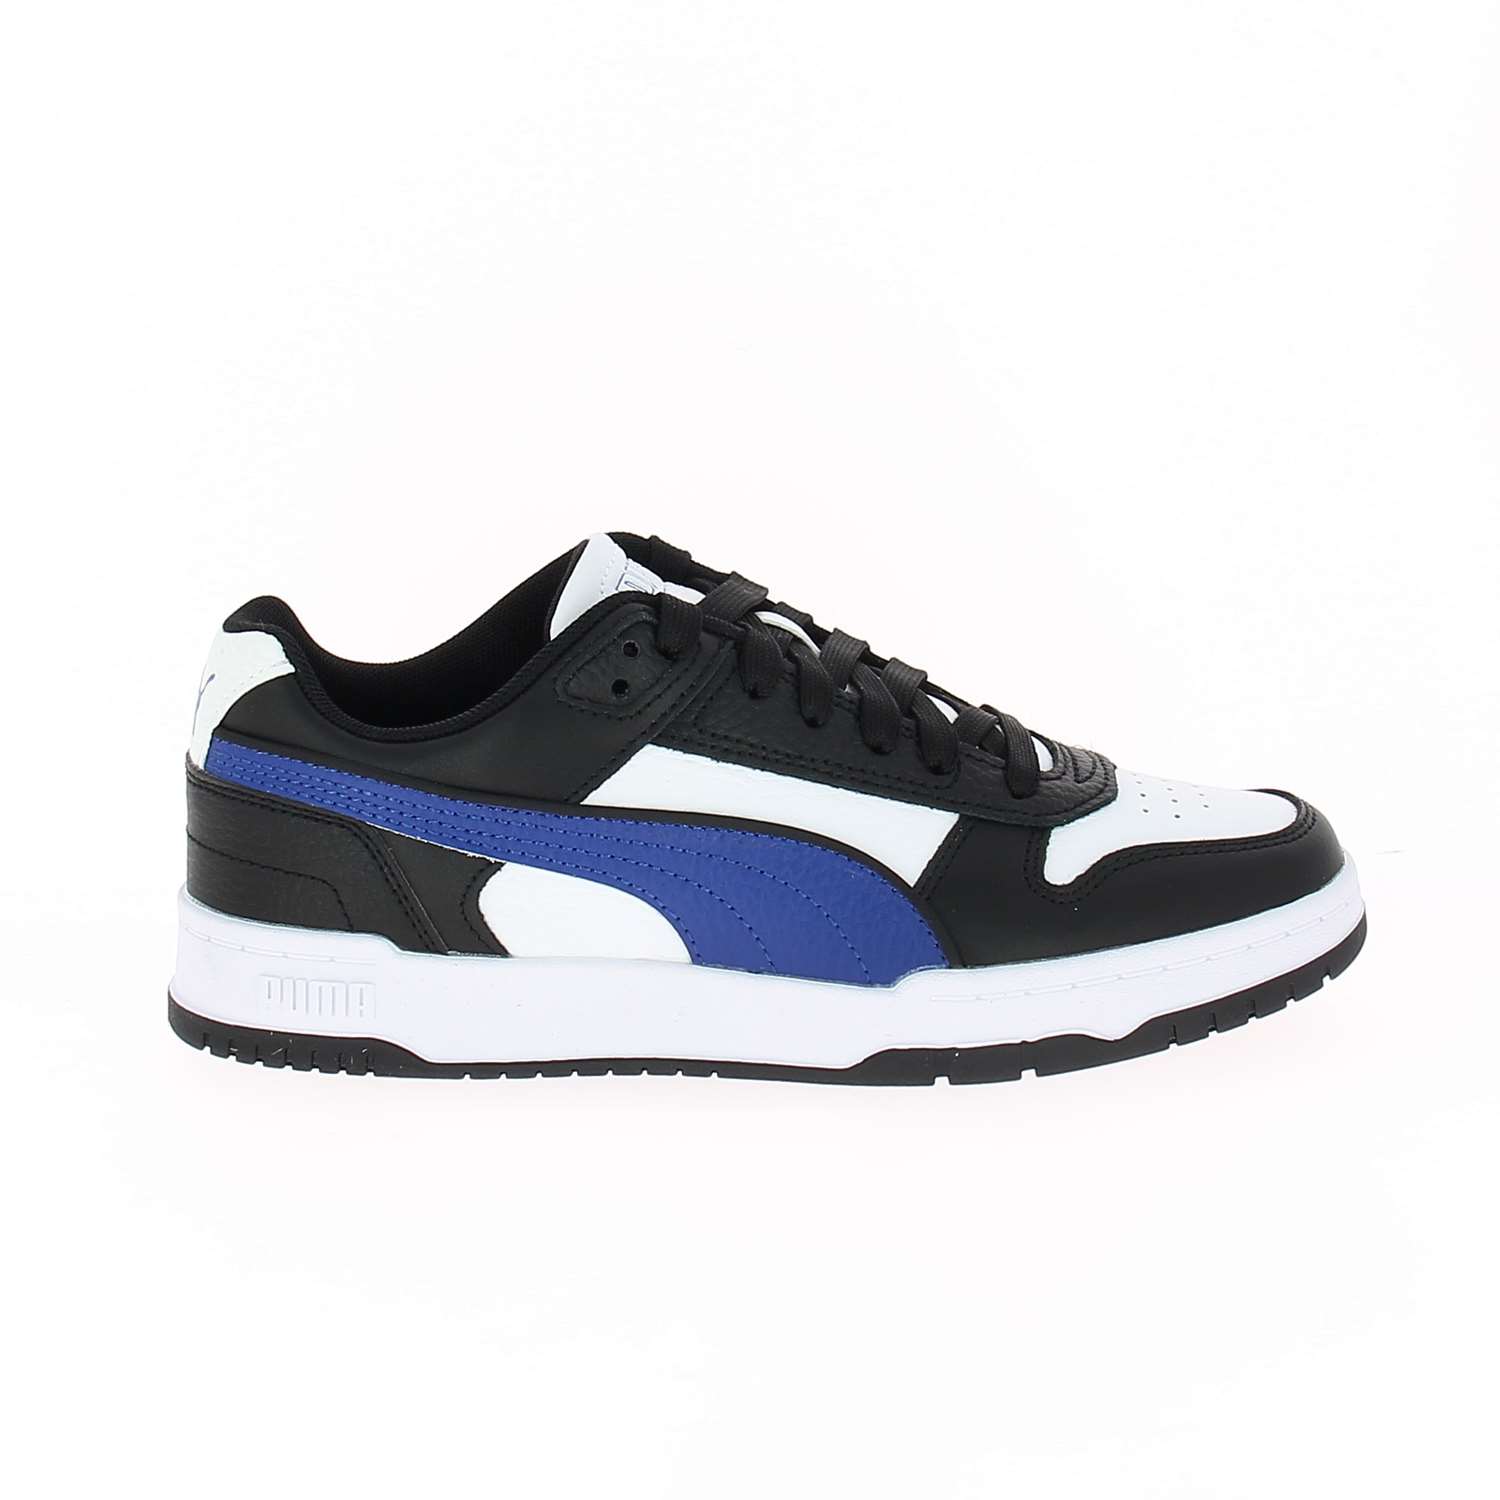 02 - RBD GAME LOW - PUMA -  - Synthétique